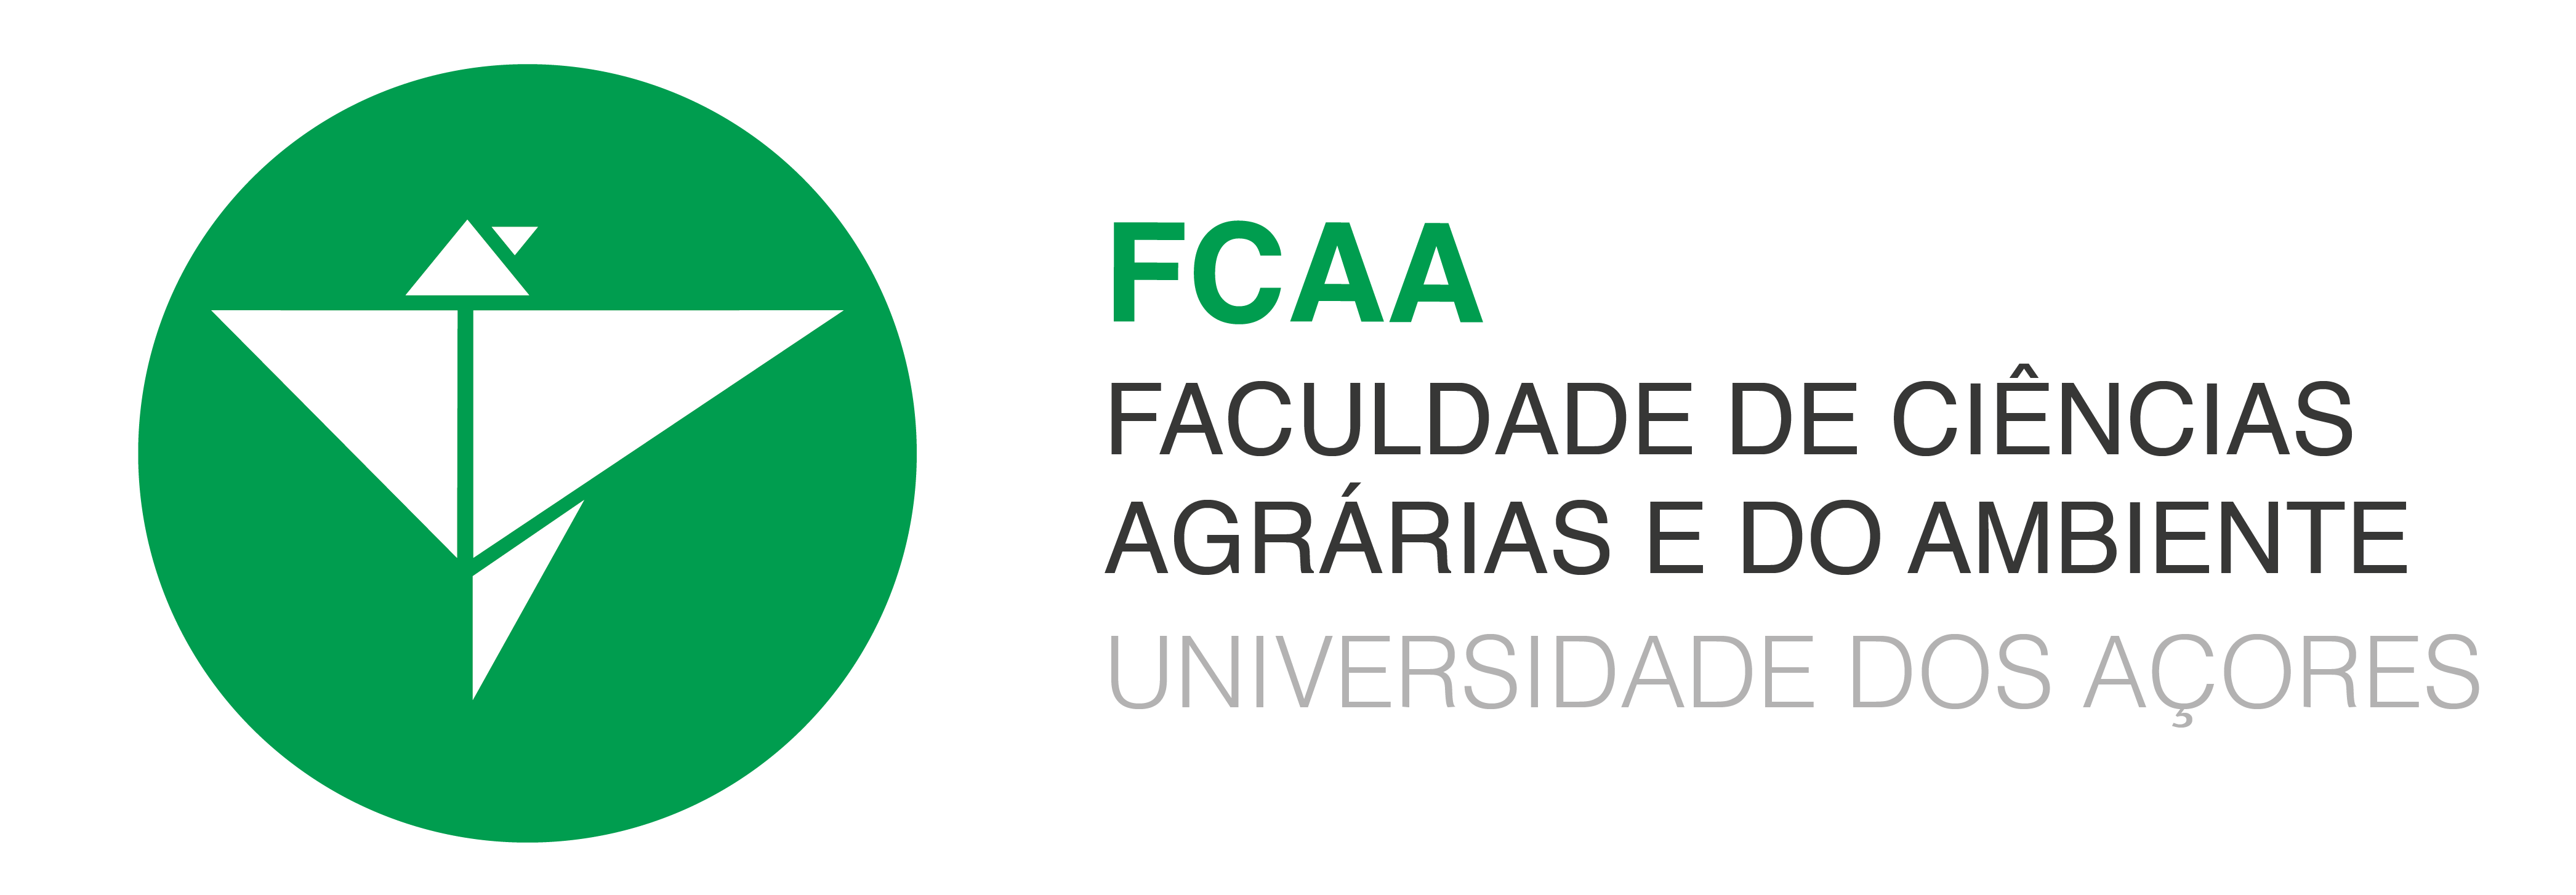 FCAA.png